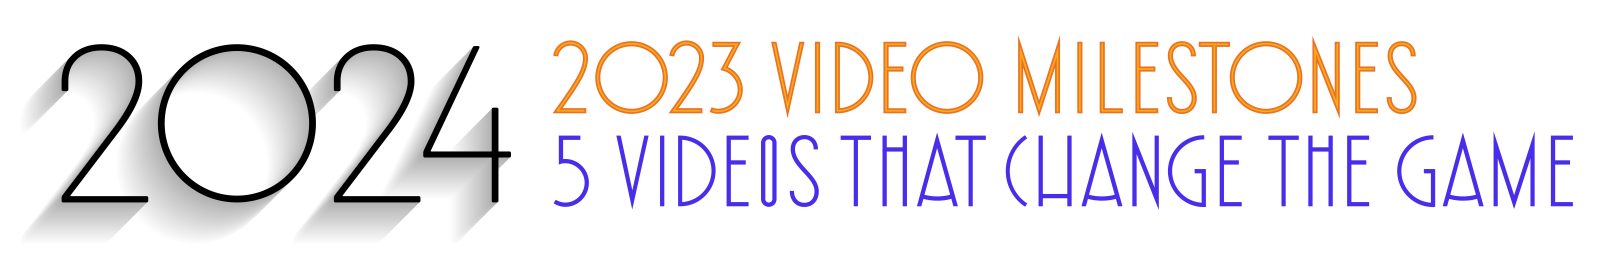 2024 - 5 videos to watch